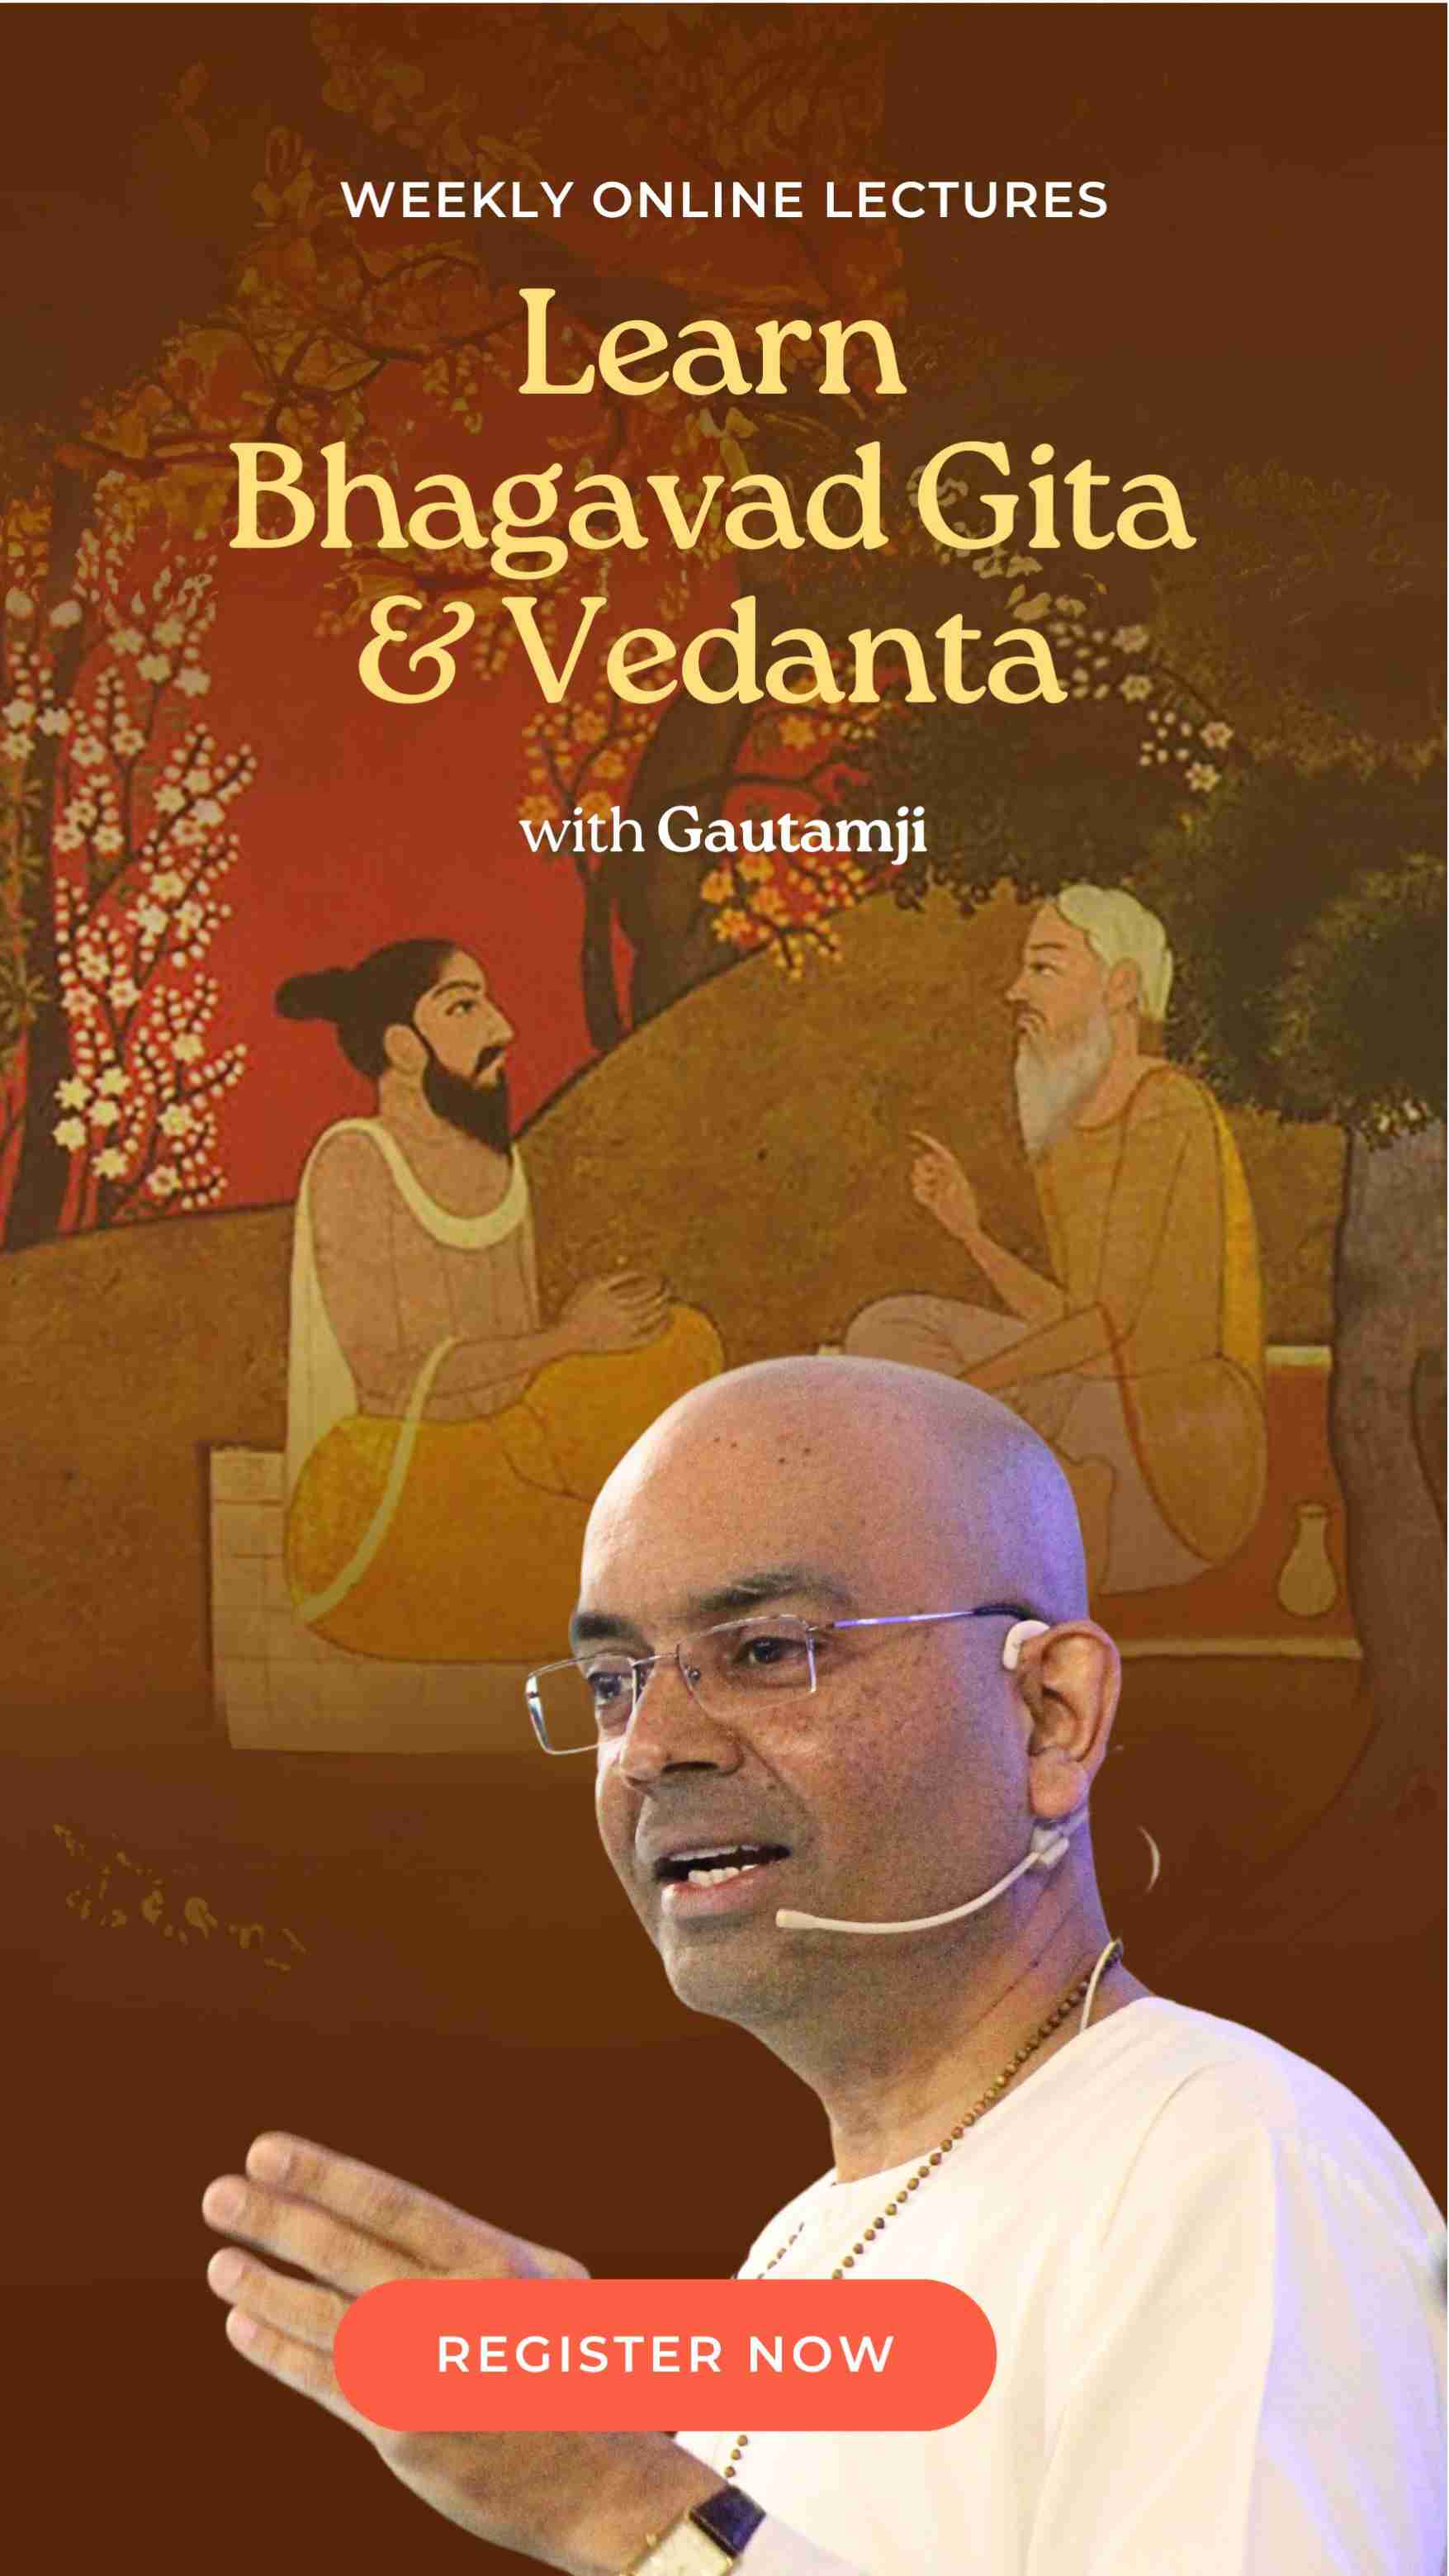 Weekly Online Lectures - Learn Bhagavad Gita and Vedanta with Gautamji